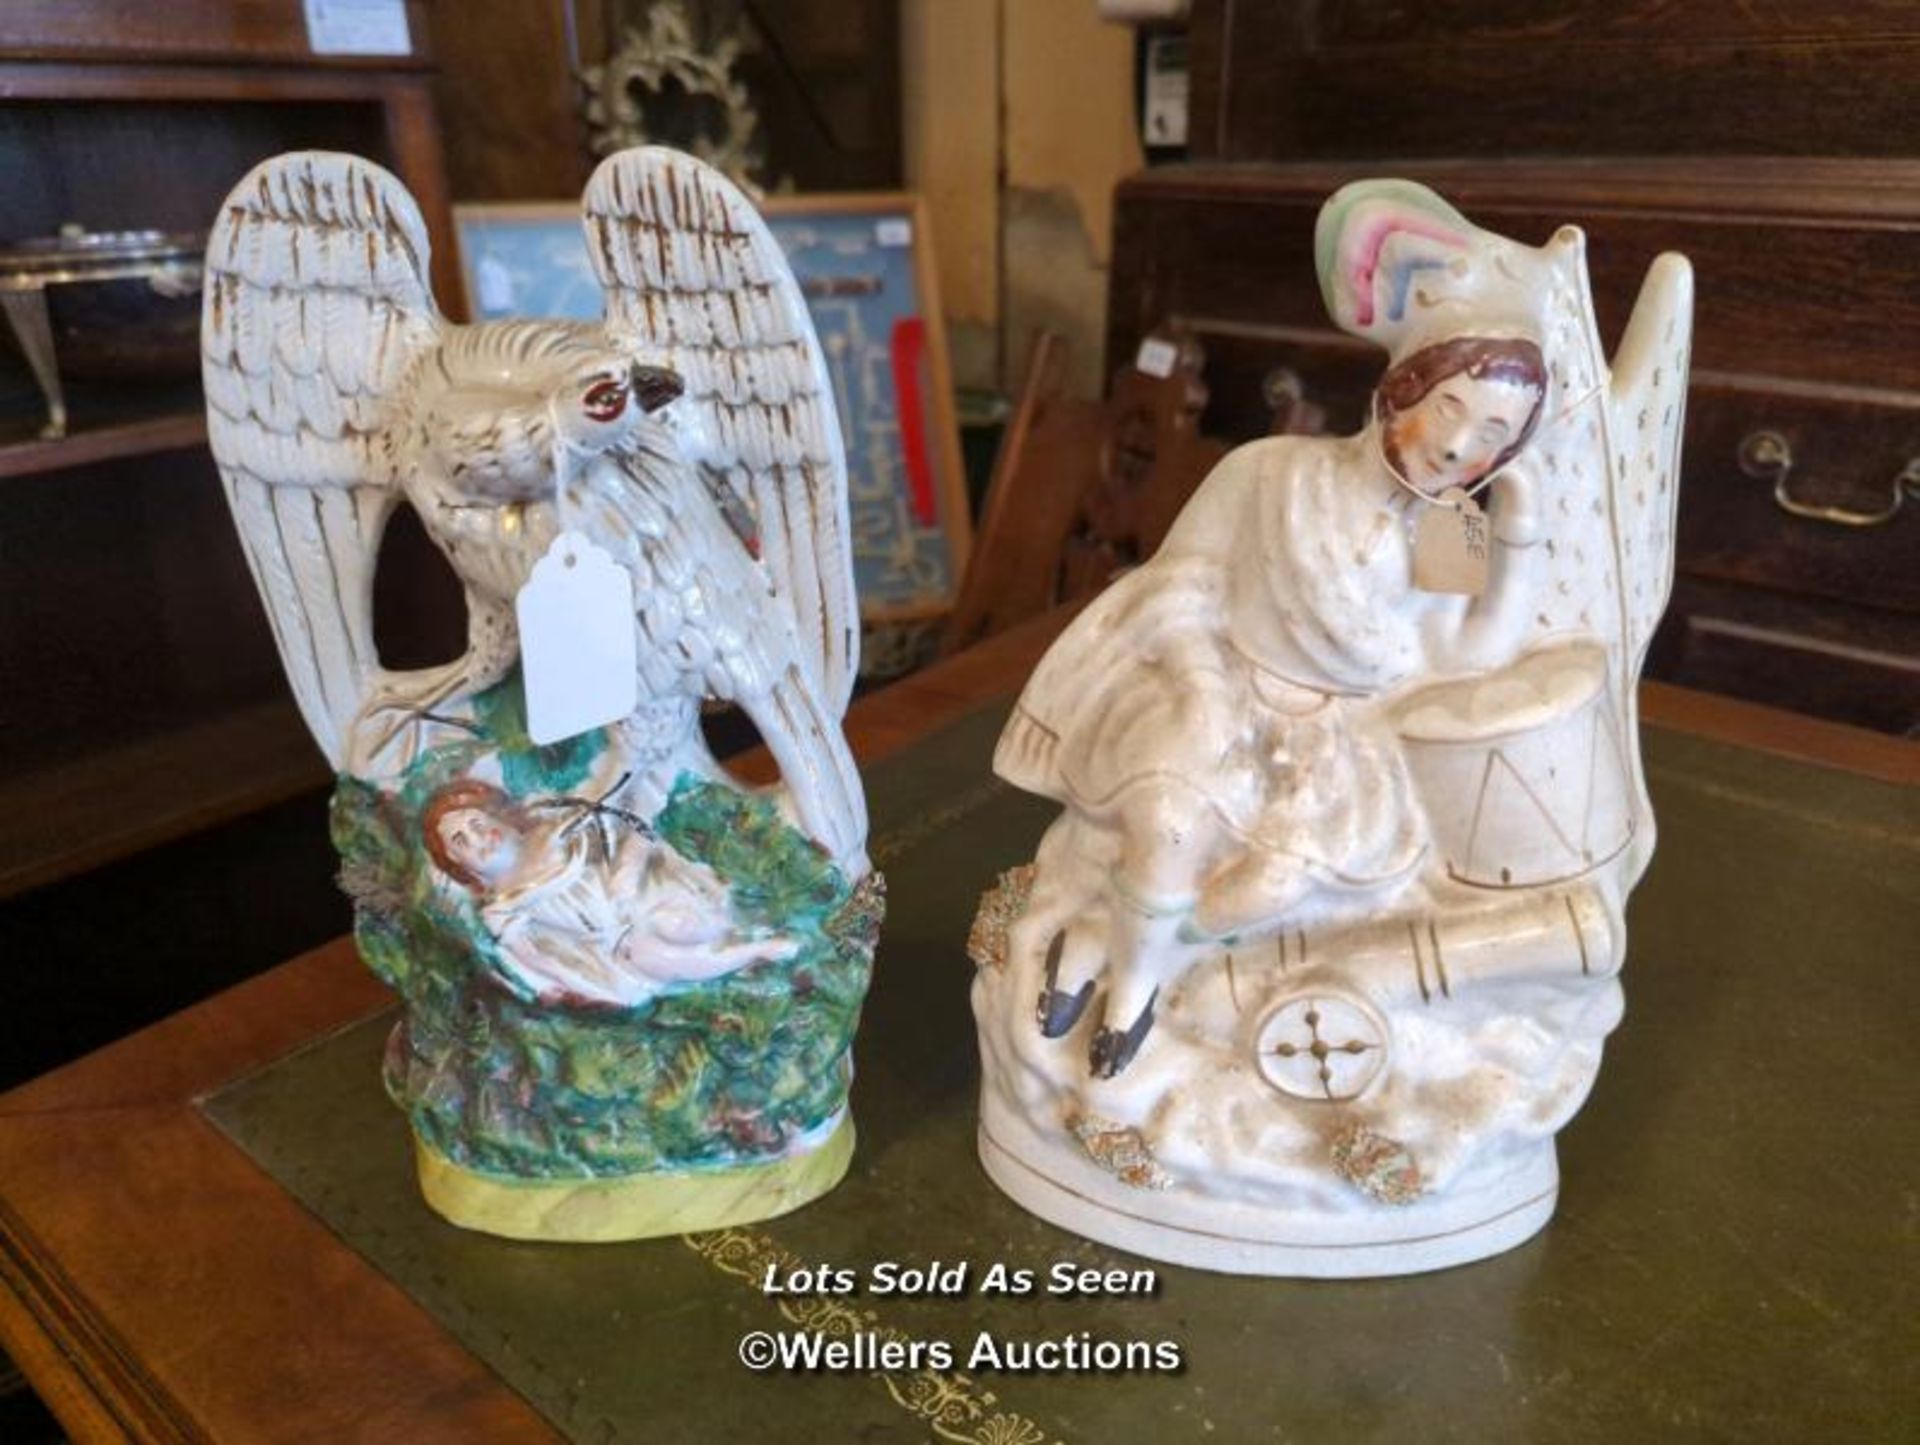 *TWO STAFFORDSHIRE FIGURES INCLUDING EAGLE AND CHILD / LOCATED AT VICTORIA ANTIQUES, WADEBRIDGE,